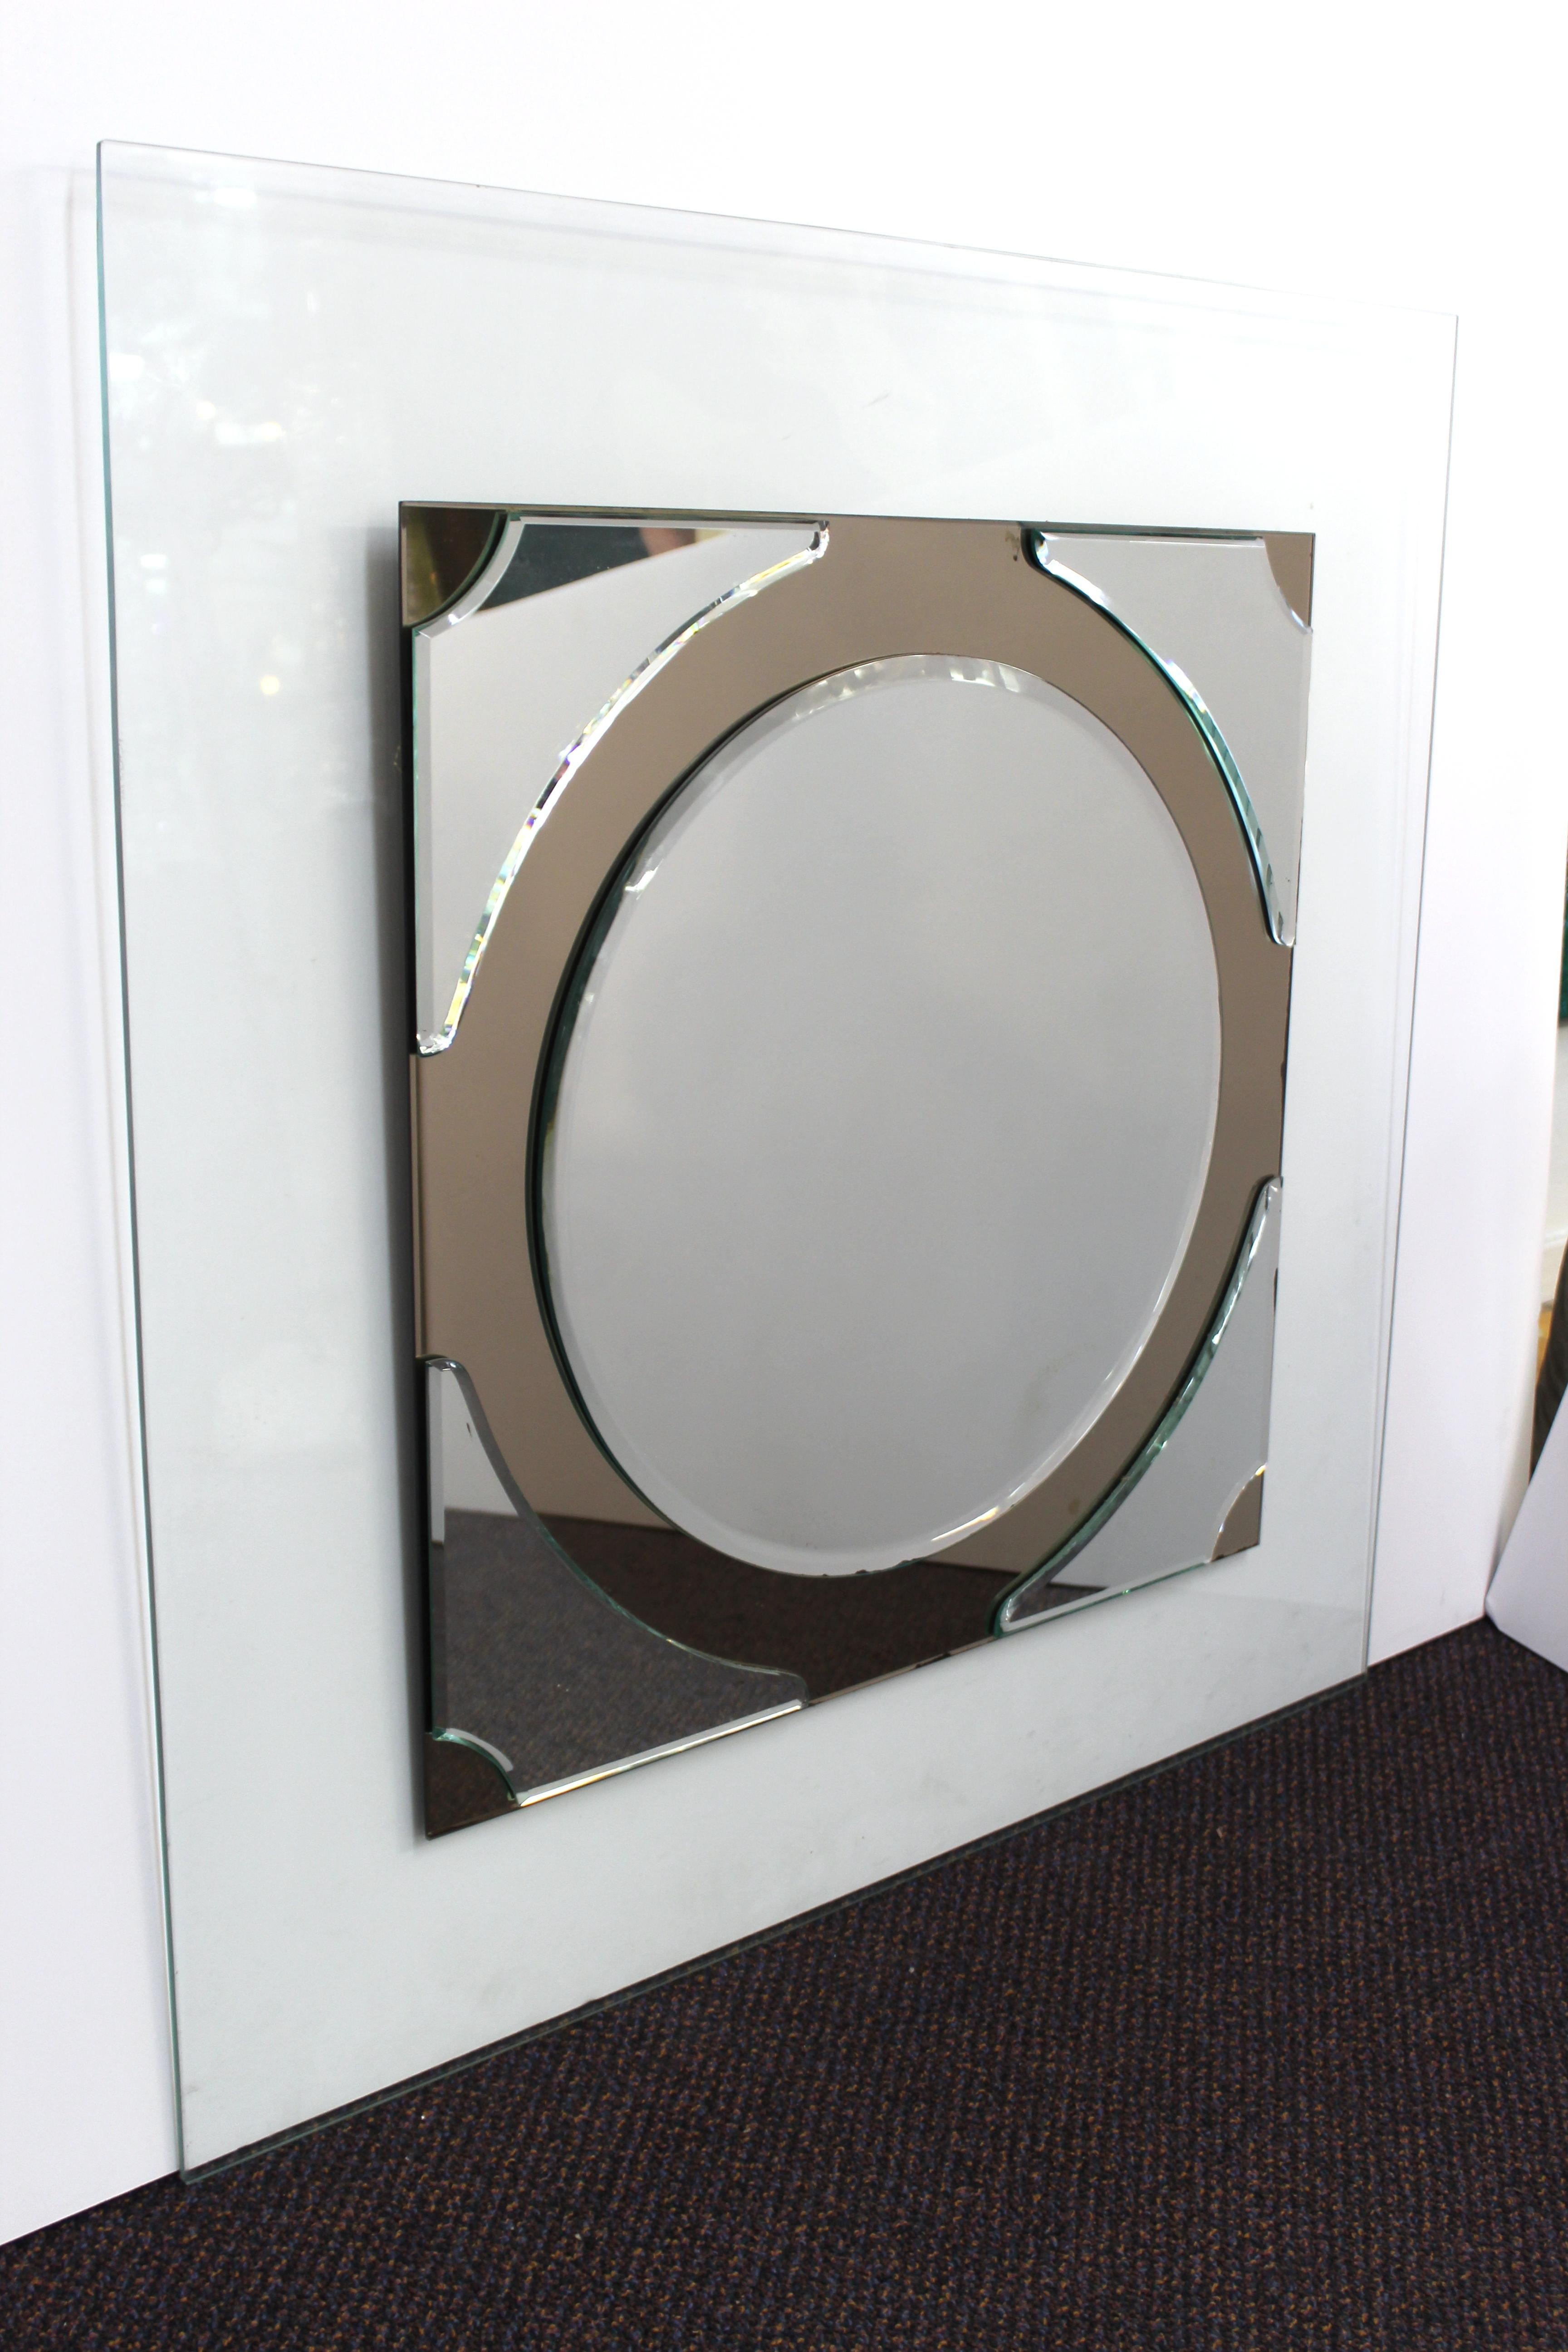 Postmodern wall mirror consisting of a round mirror with edge corner mirror elements, bedded atop a rectangular glass surface. The piece dates from the circa 1990s and is in great vintage condition.